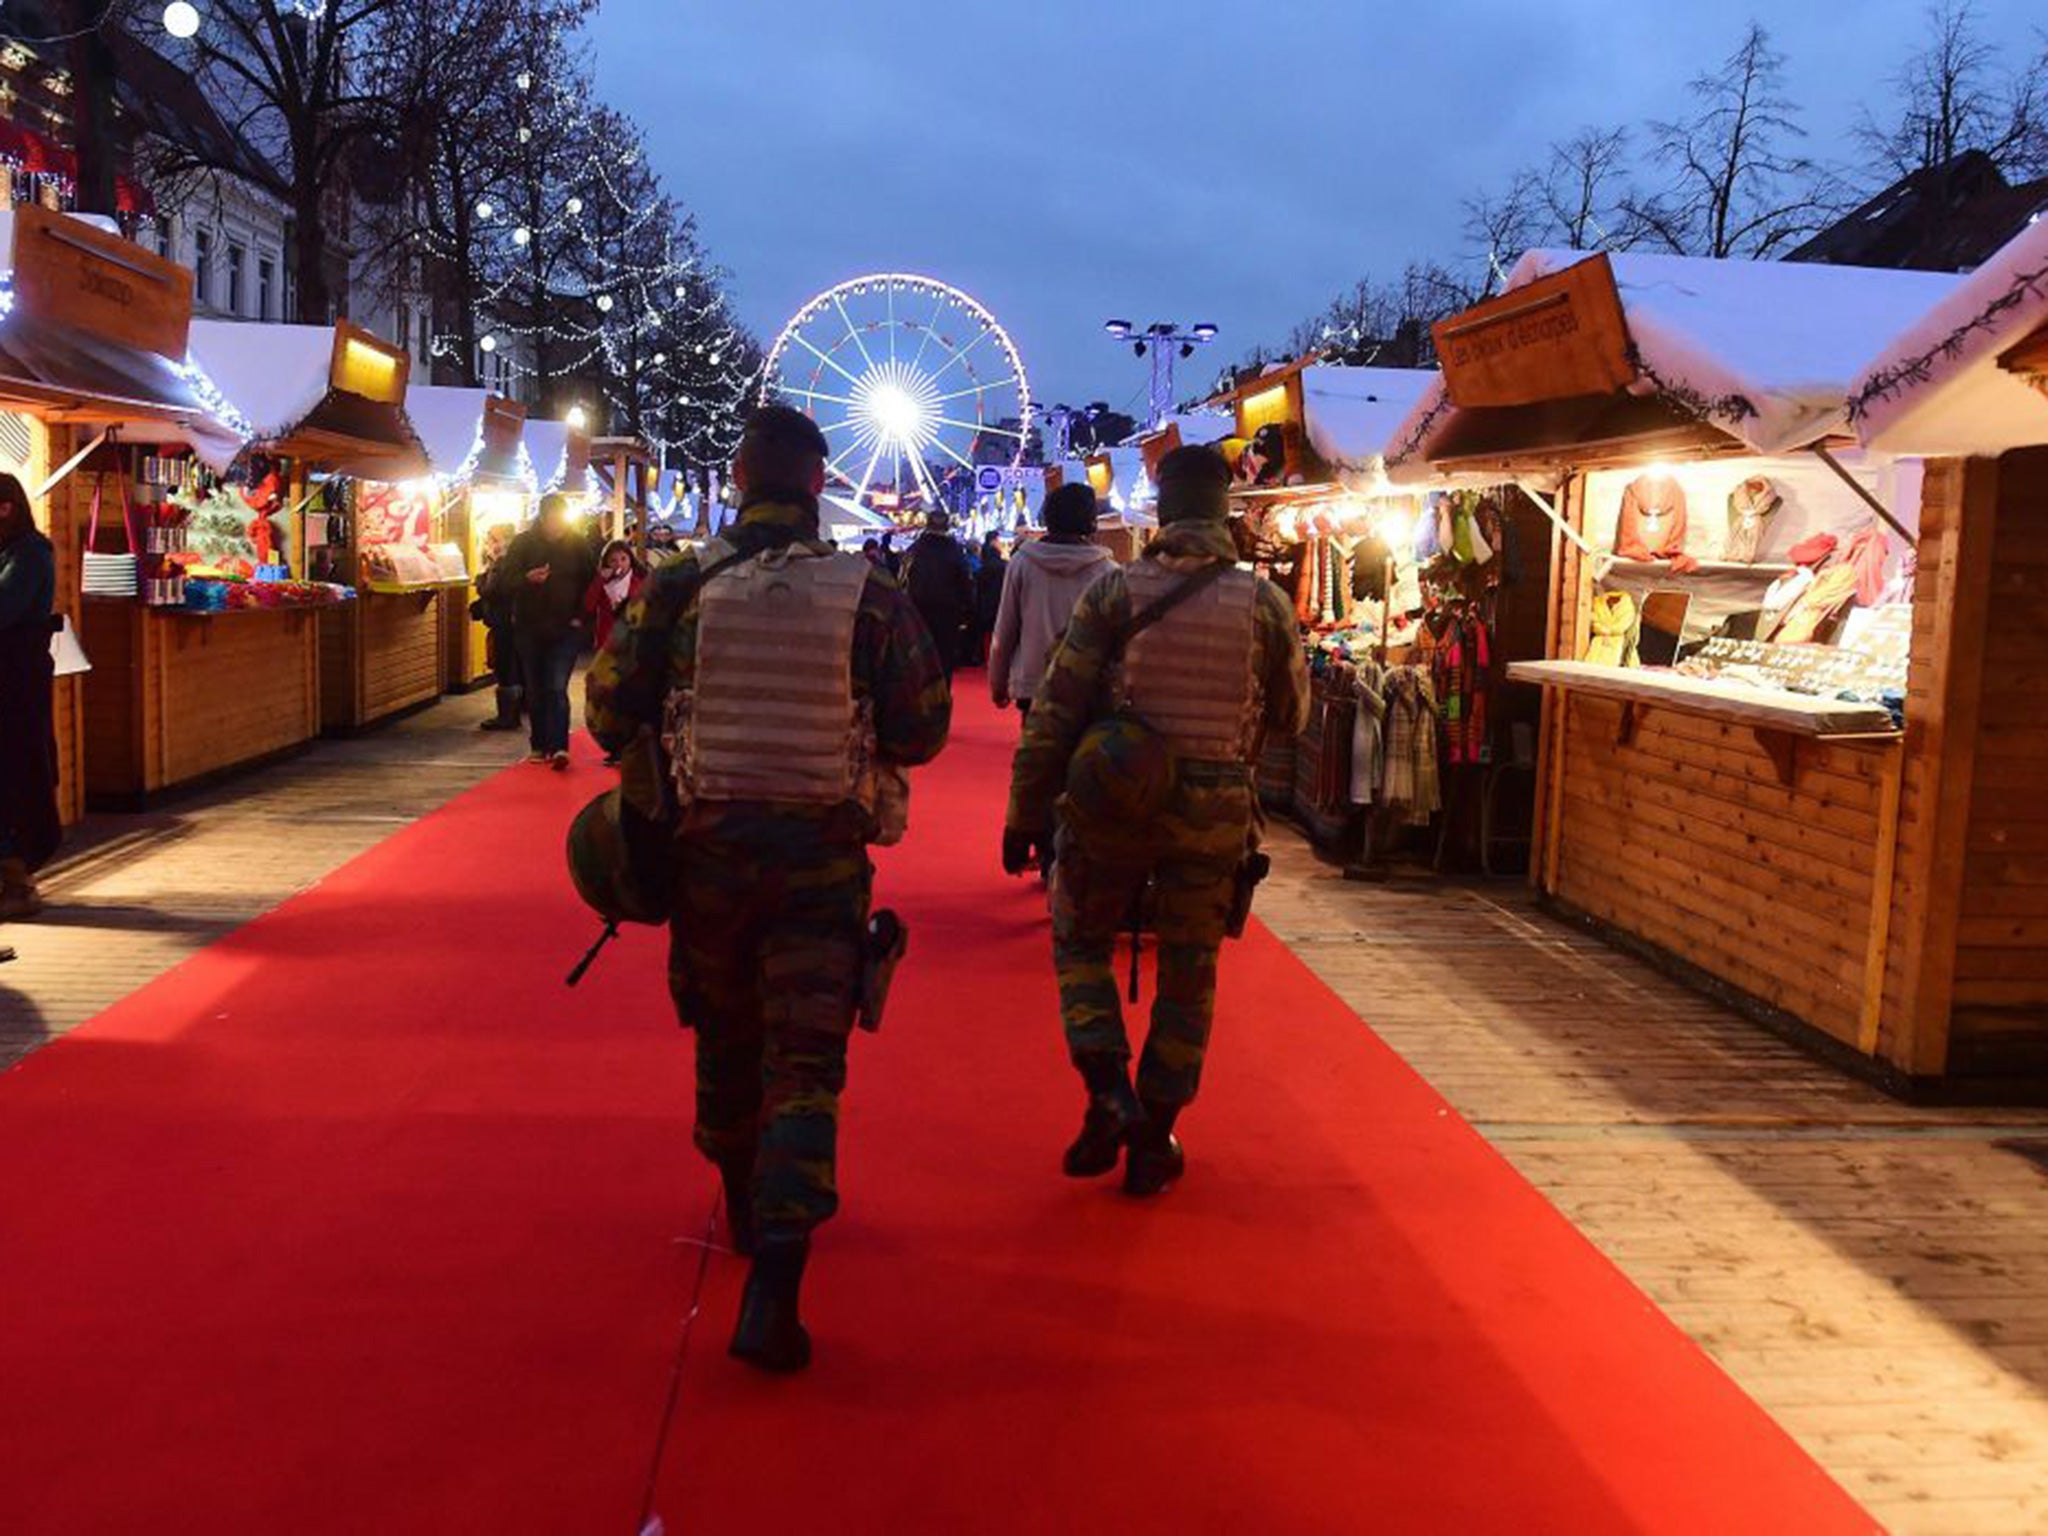 Soldiers patrol a Christmas market in Brussels